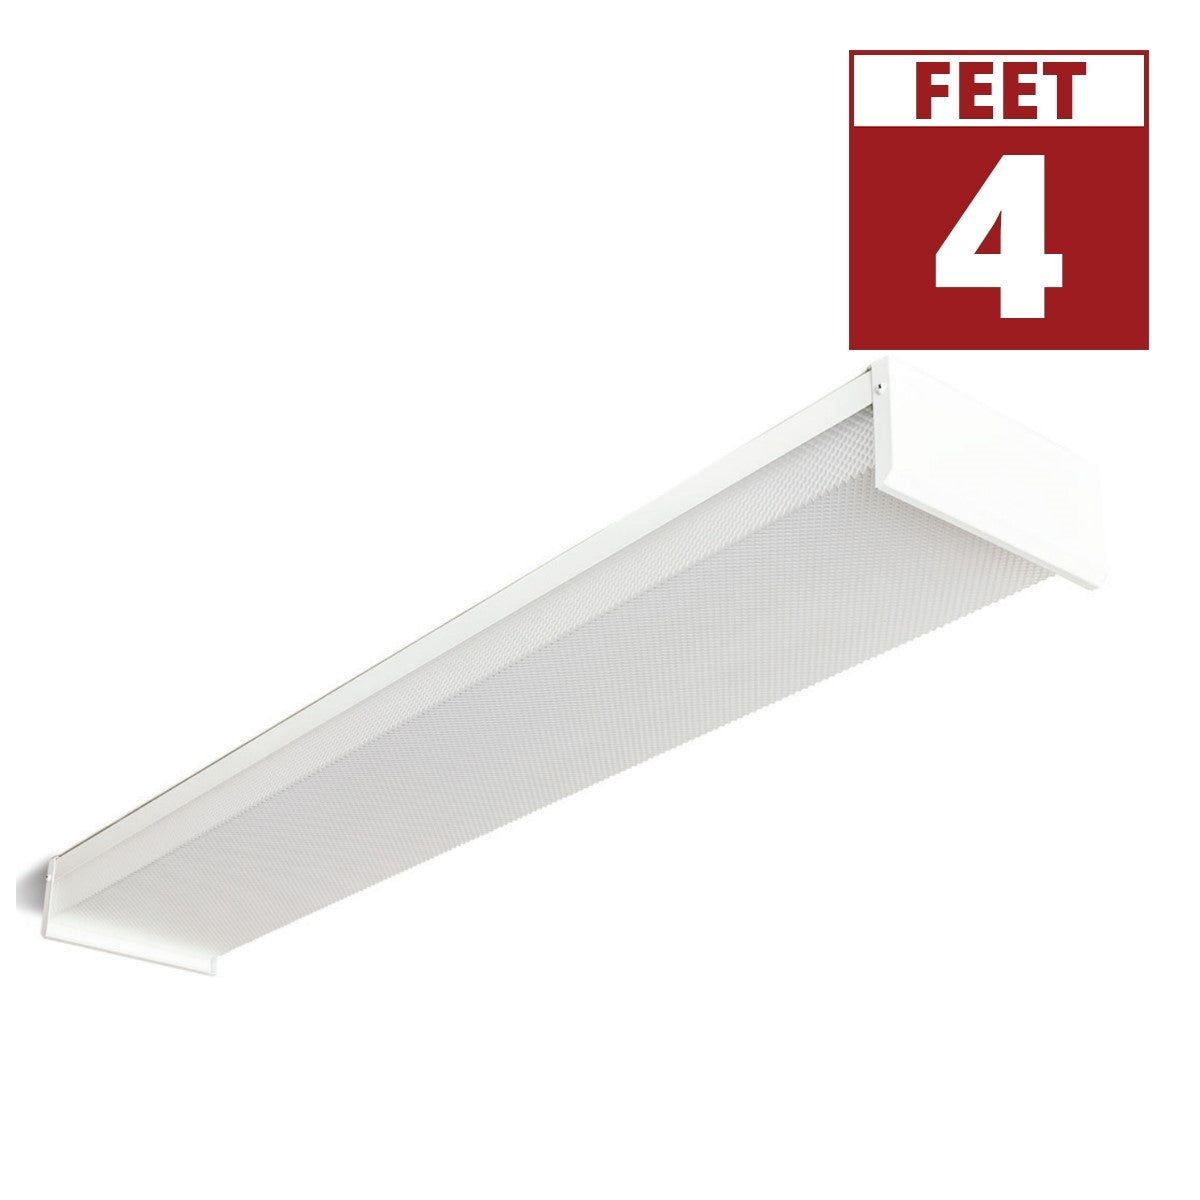 4ft LED Ready Wrap Fixture 4-lamp Single End Wiring LED T8 Bulbs Not Included